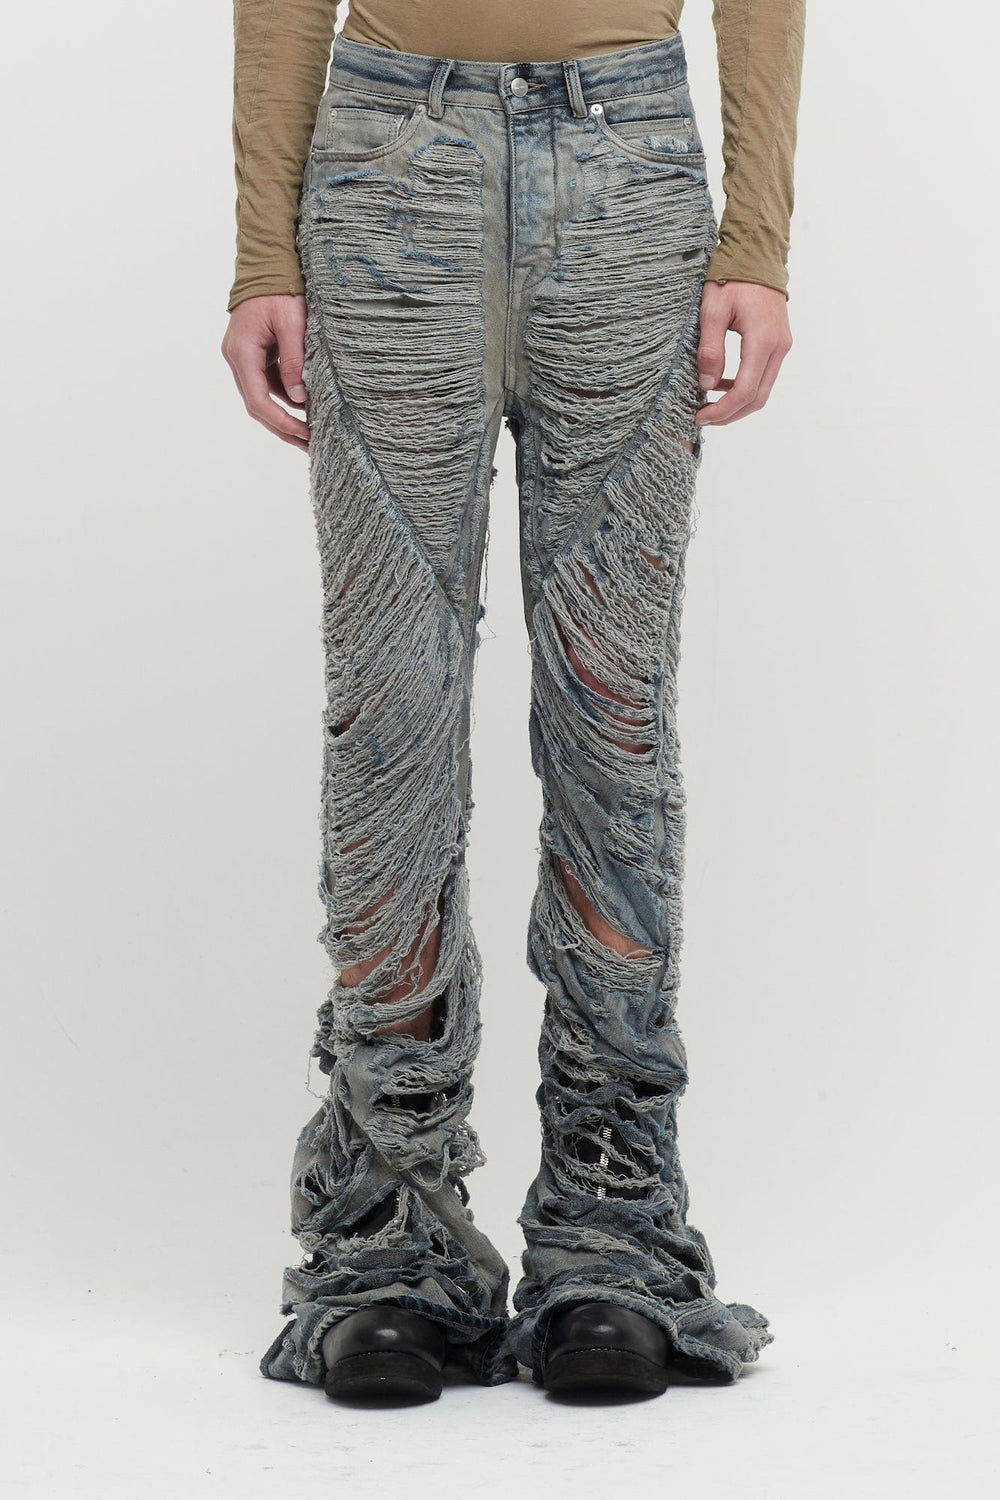 Rick Owens Bias bootcut Jeans in Shredded Hustler Blue – Antidote Fashion  and Lifestyle